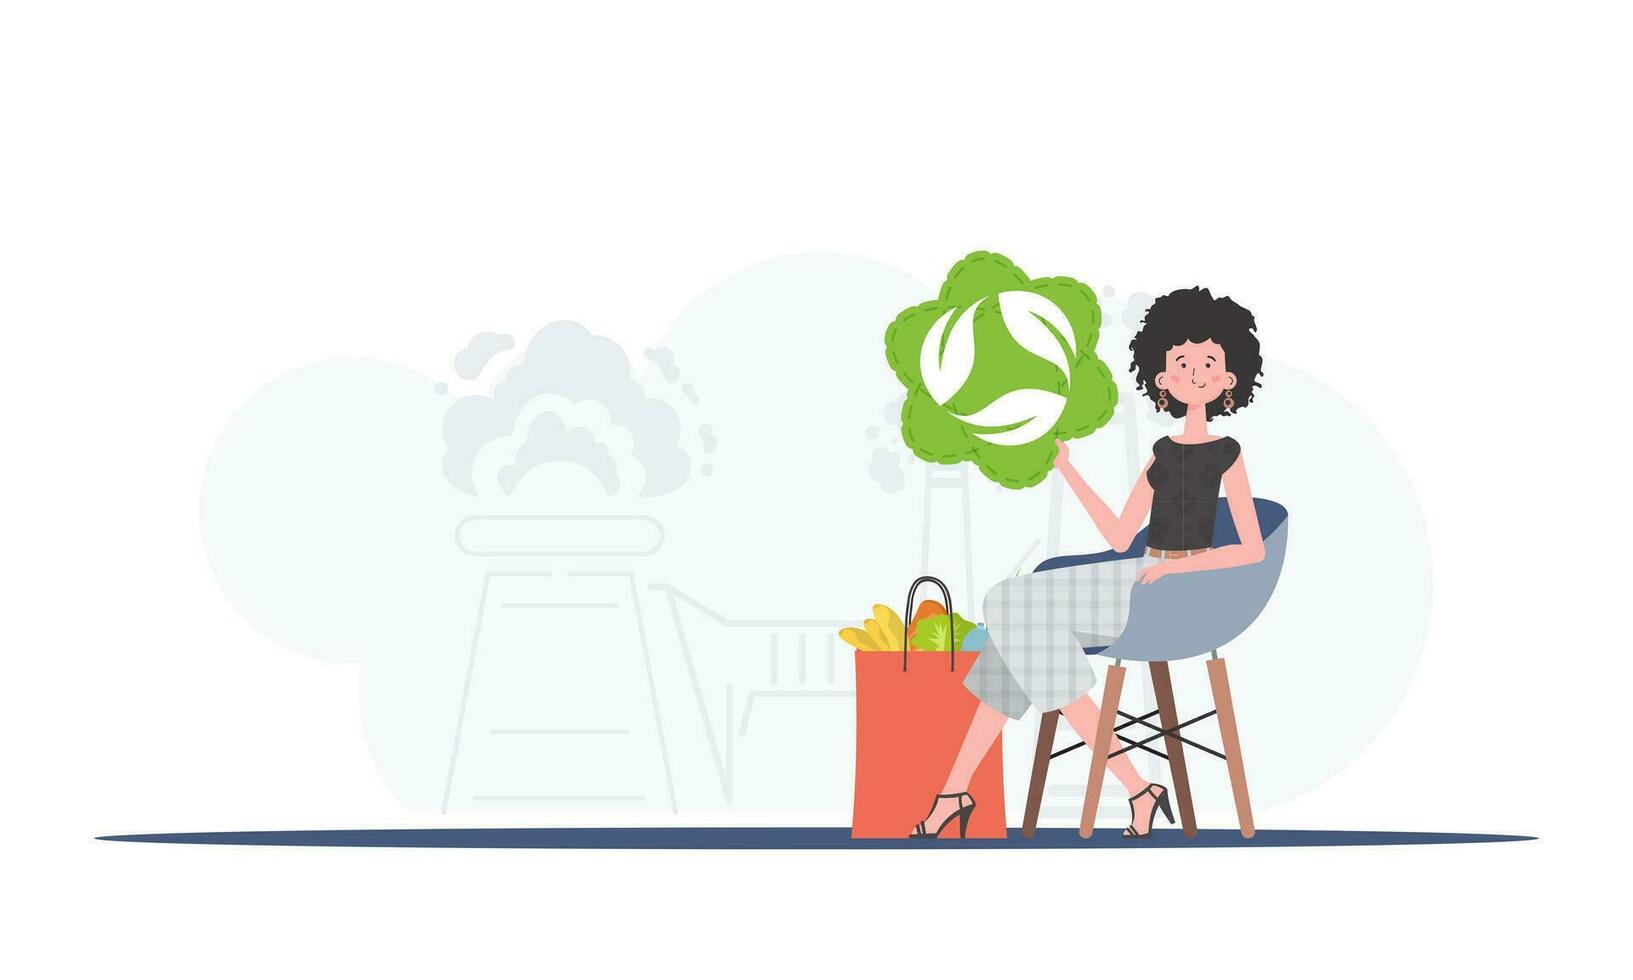 The girl is sitting next to a package with healthy food and holding an EKO icon. Healthy food, ecology, recycling and zero waste concept. Trend vector illustration.